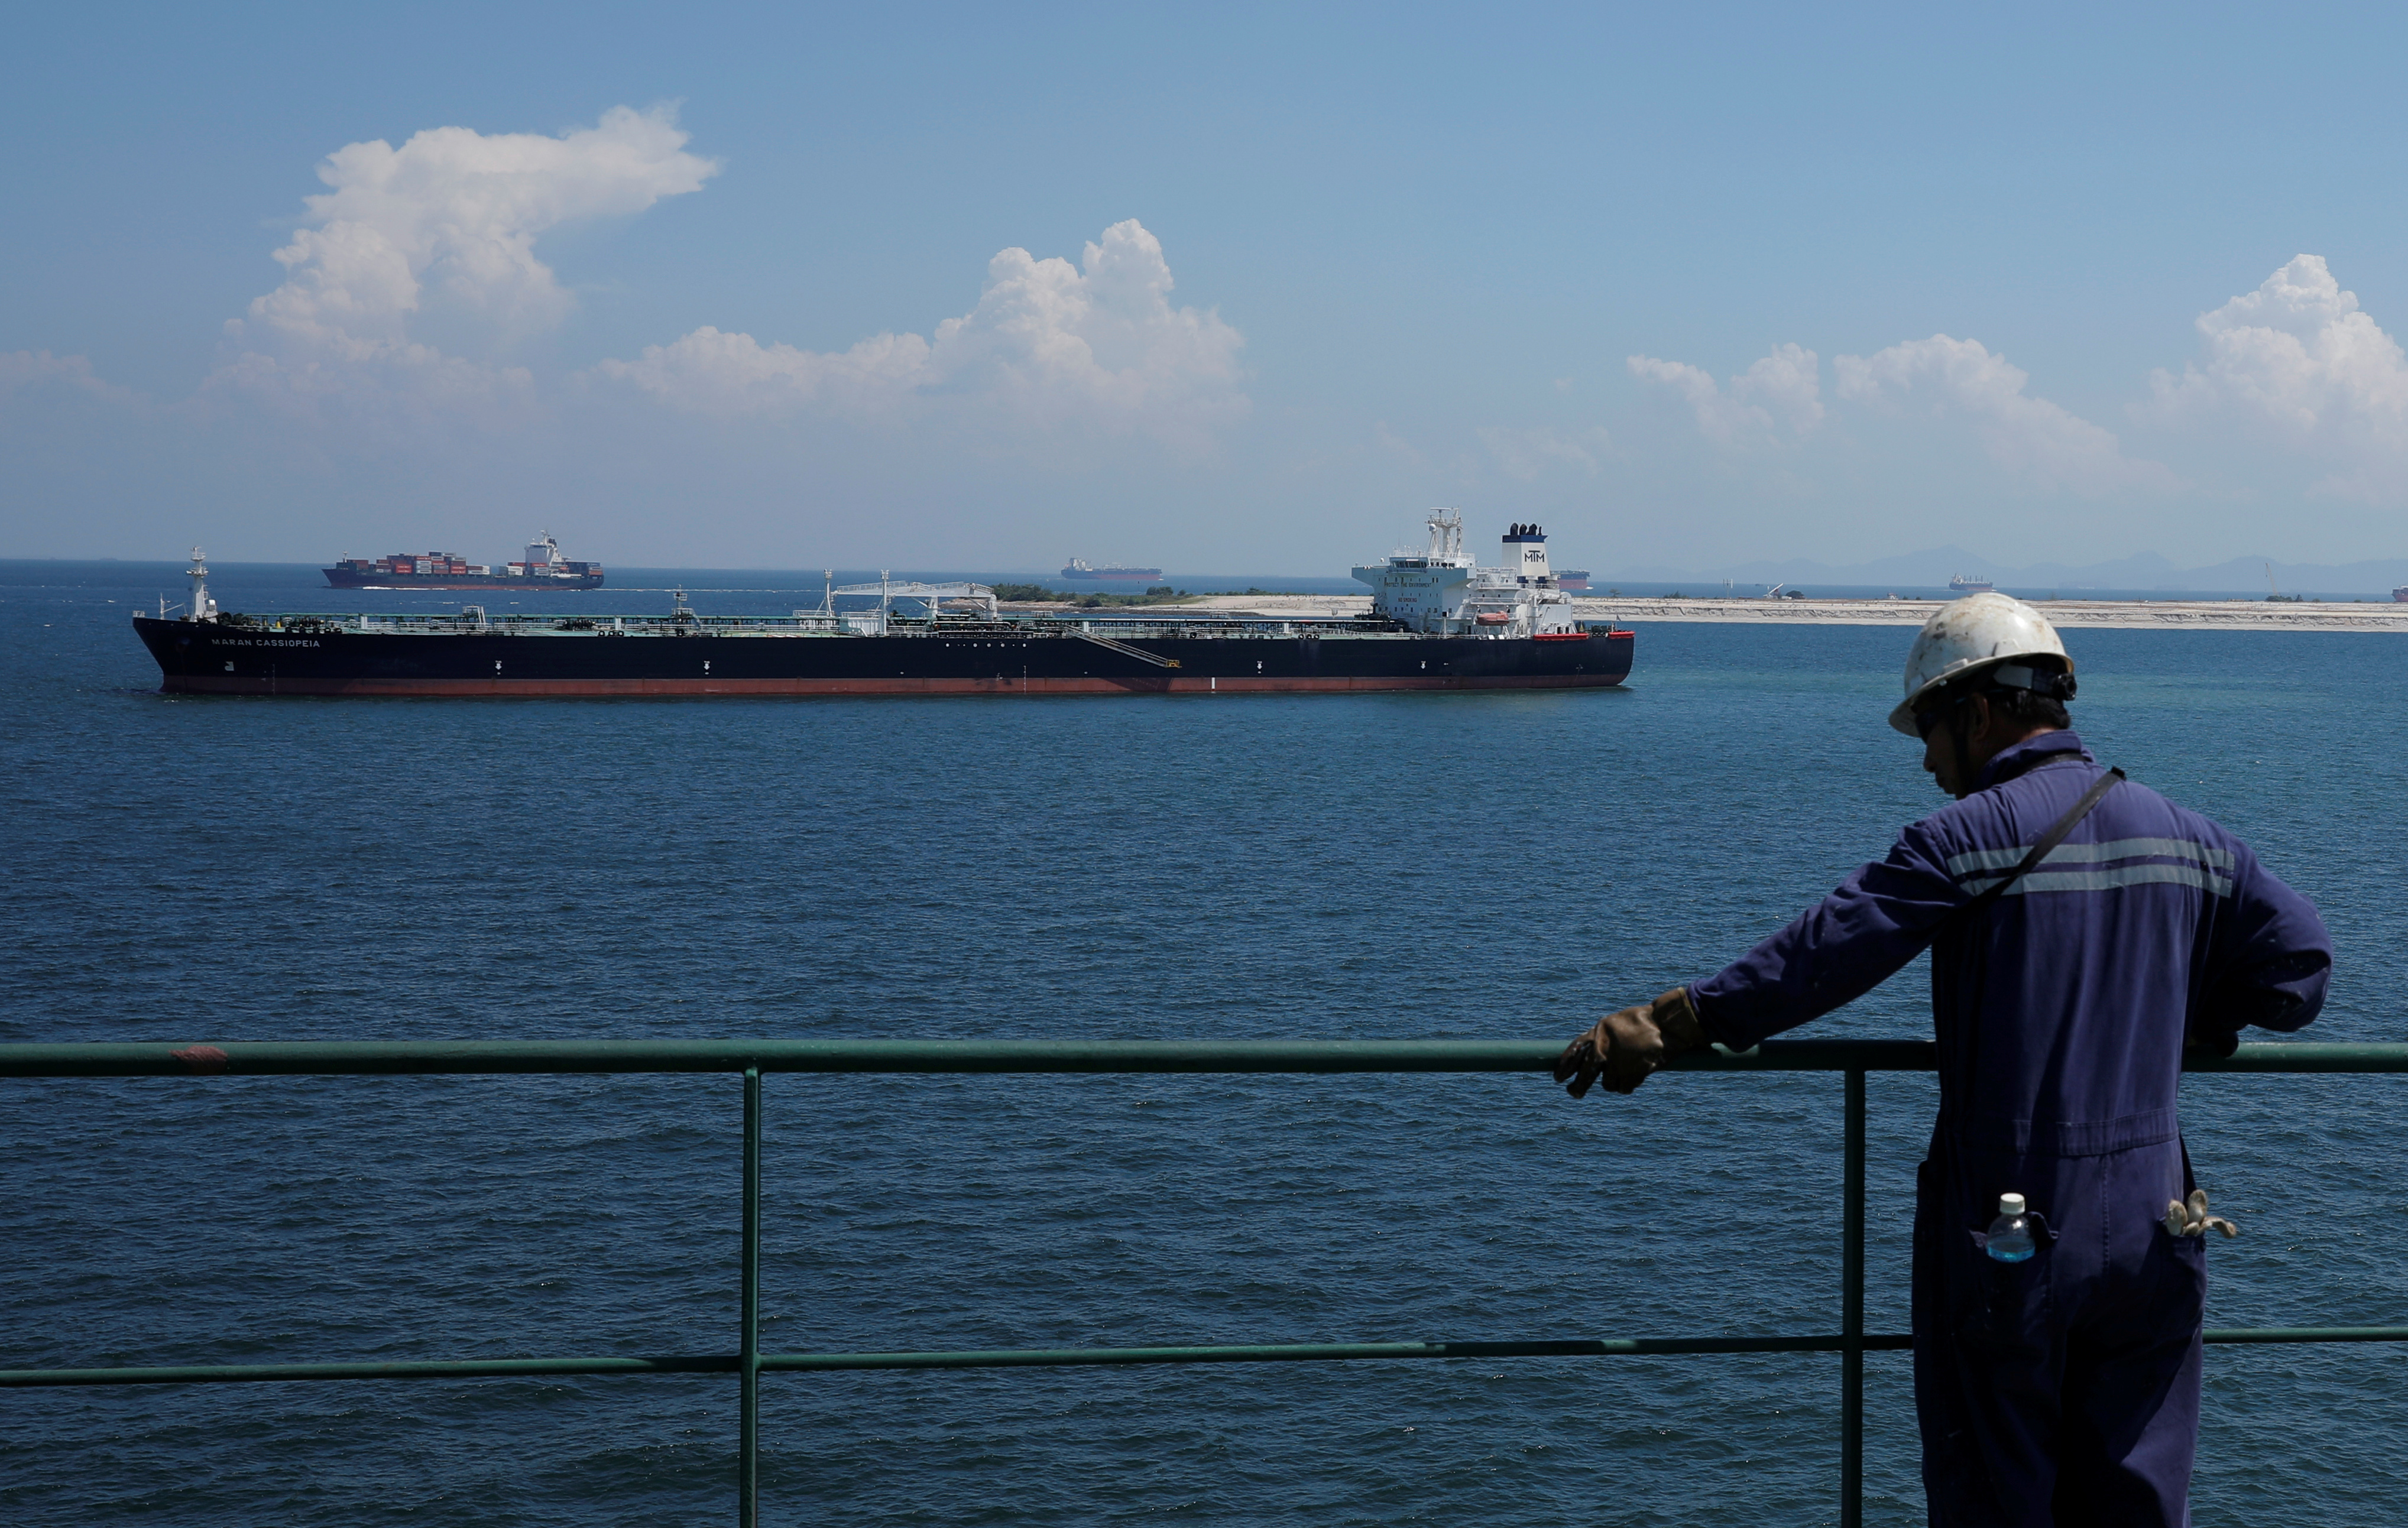 FILE PHOTO - Crude oil tanker Maran Cassiopeia is pictured in the waters off Tuas in Singapore